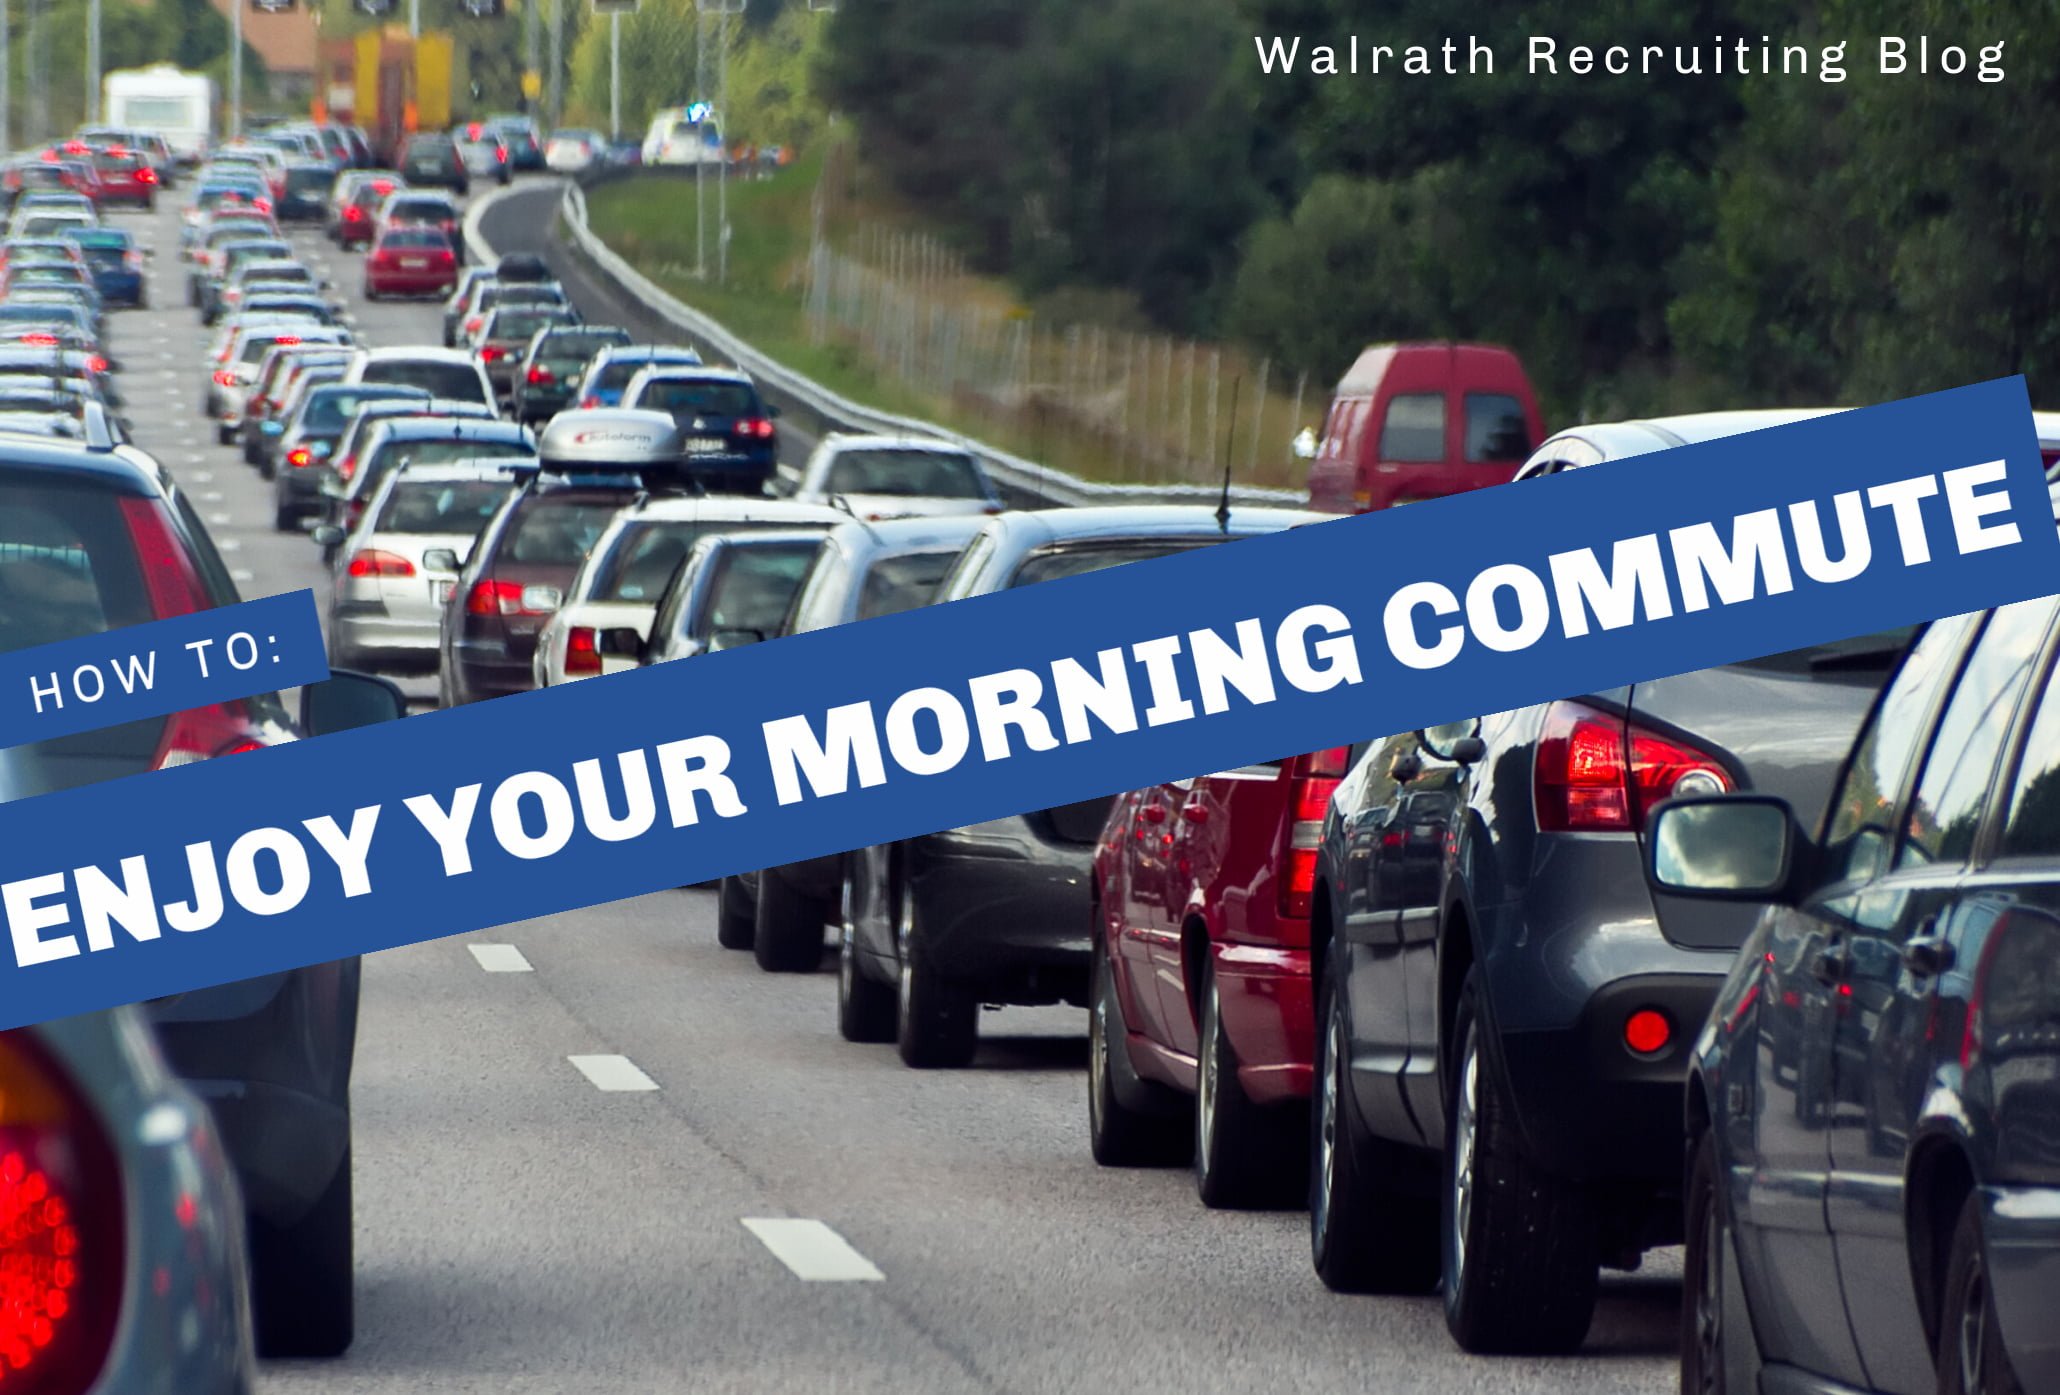 Work Commutes are tough. Check out these simpleways to make your morning commute more enjoyable!